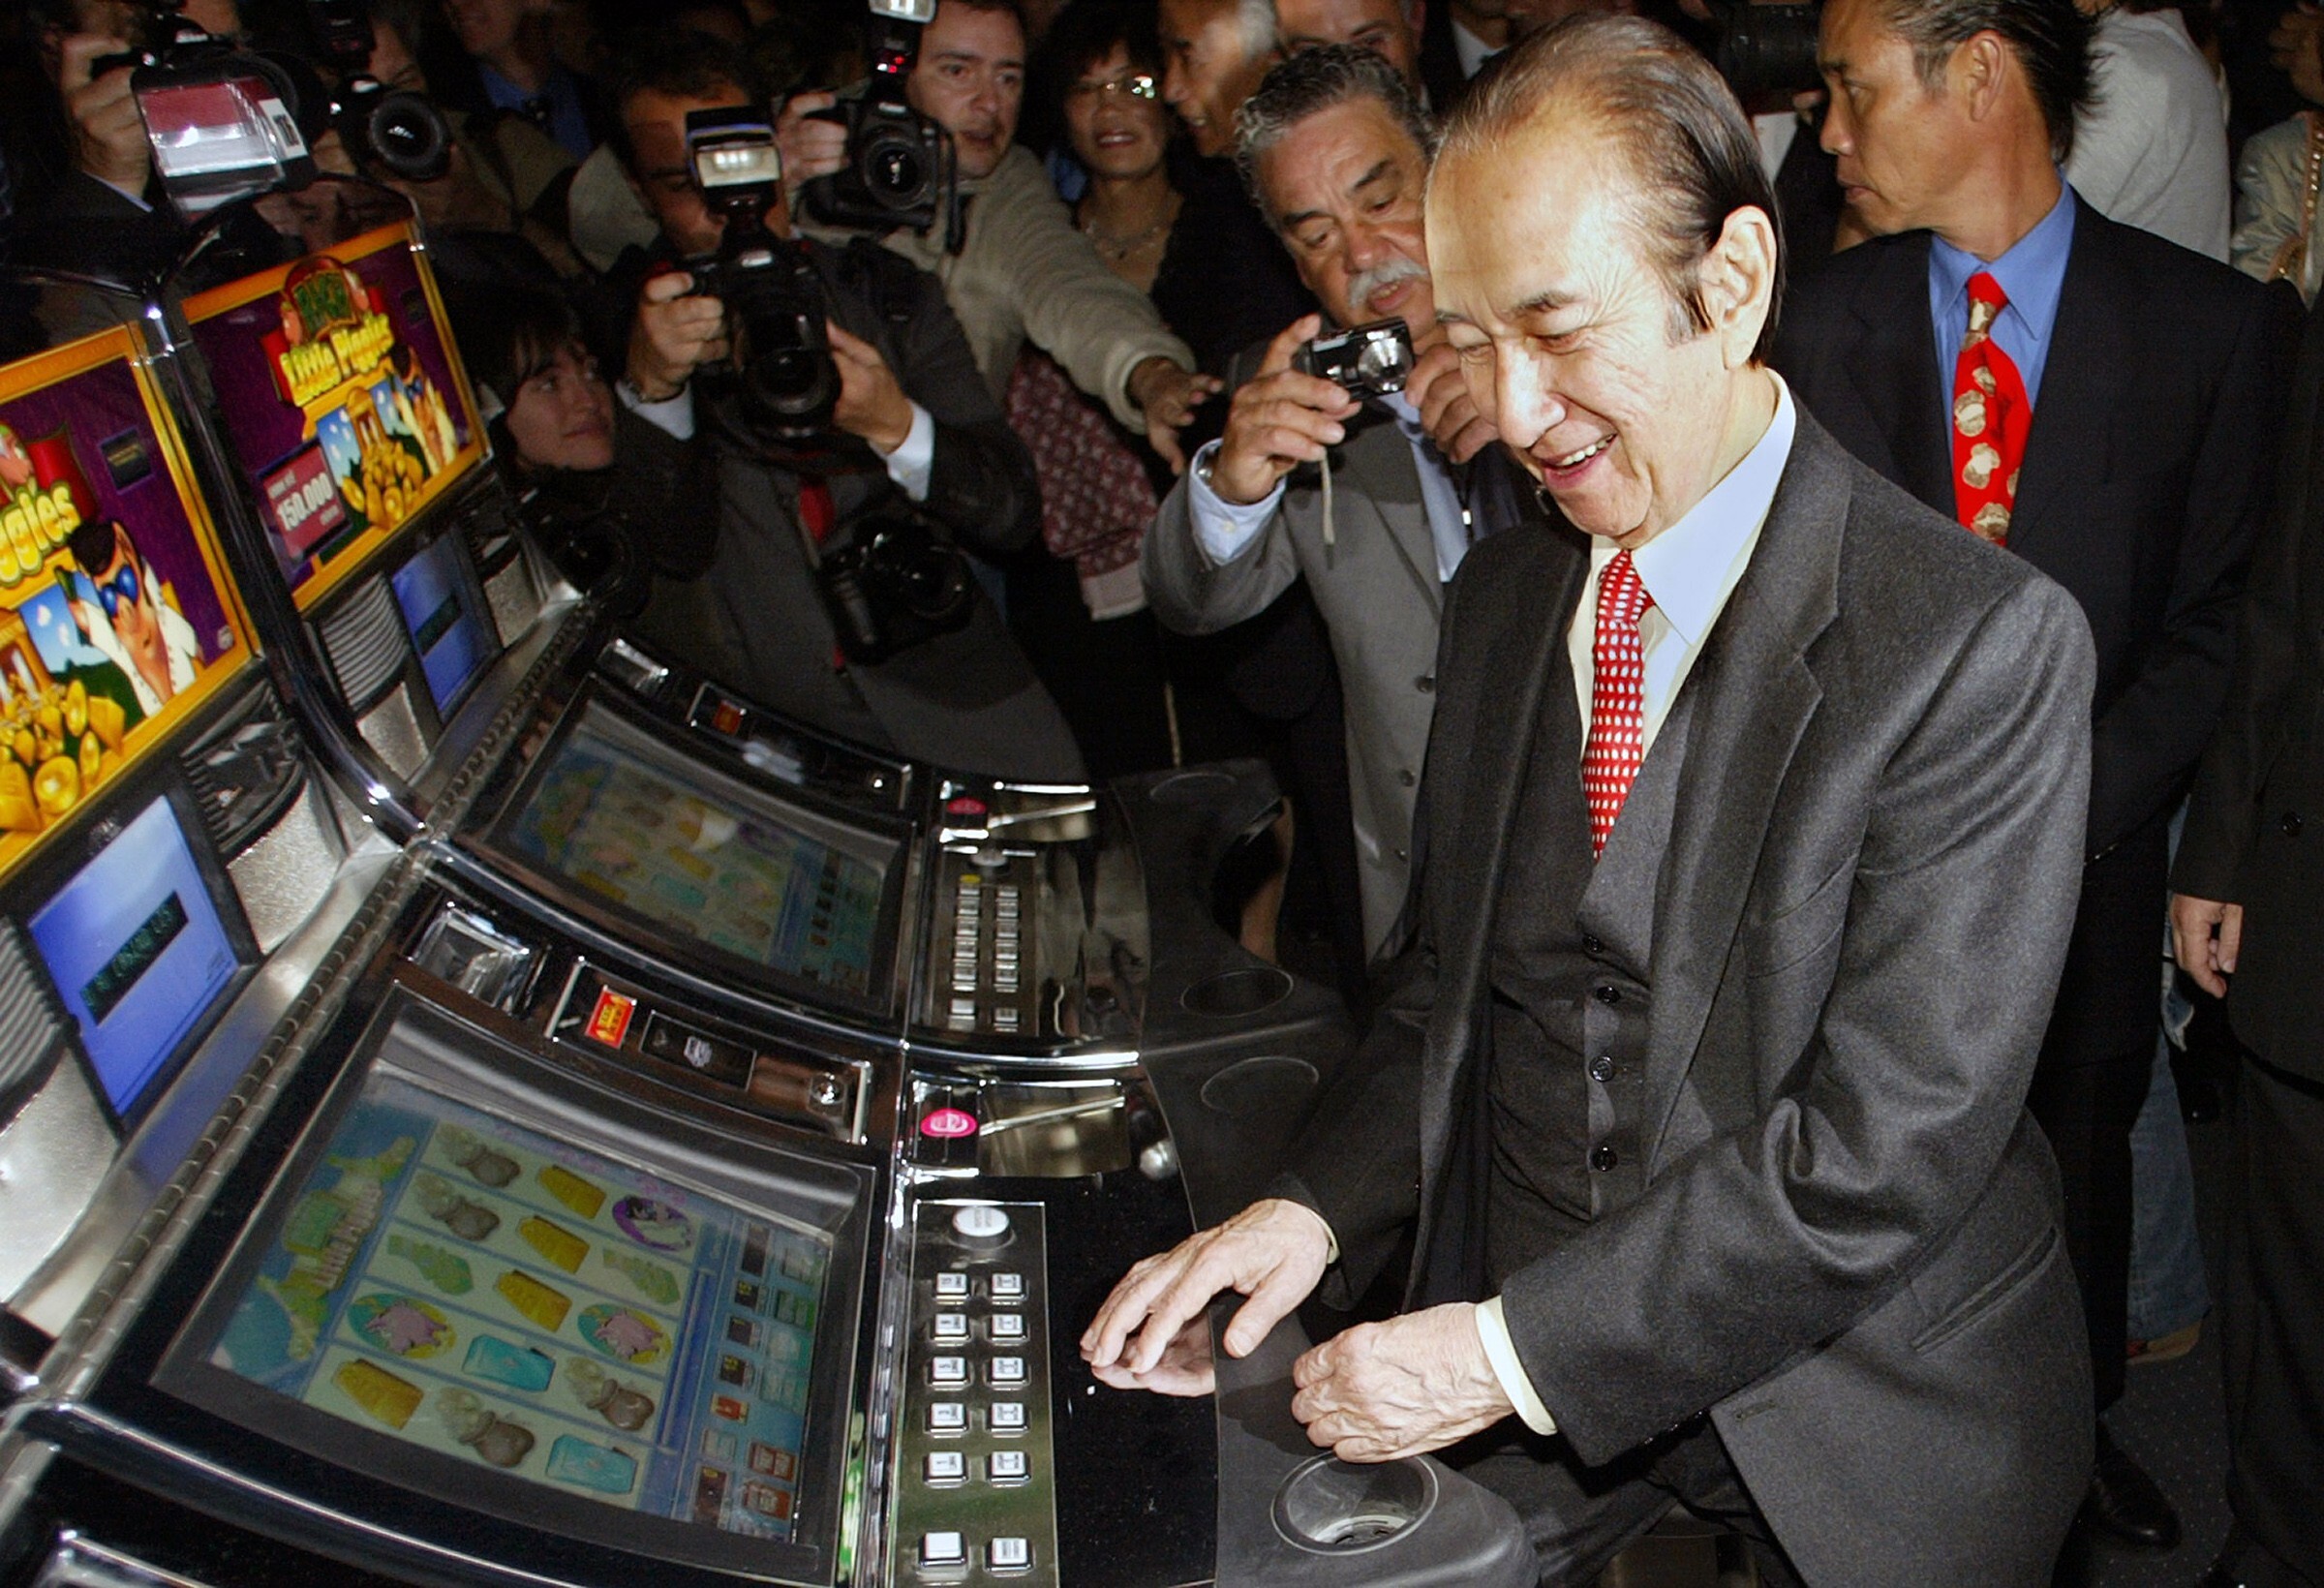 Late Macau gambling tycoon Stanley Ho opens a new casino in Lisbon in 2006. Photo: AFP